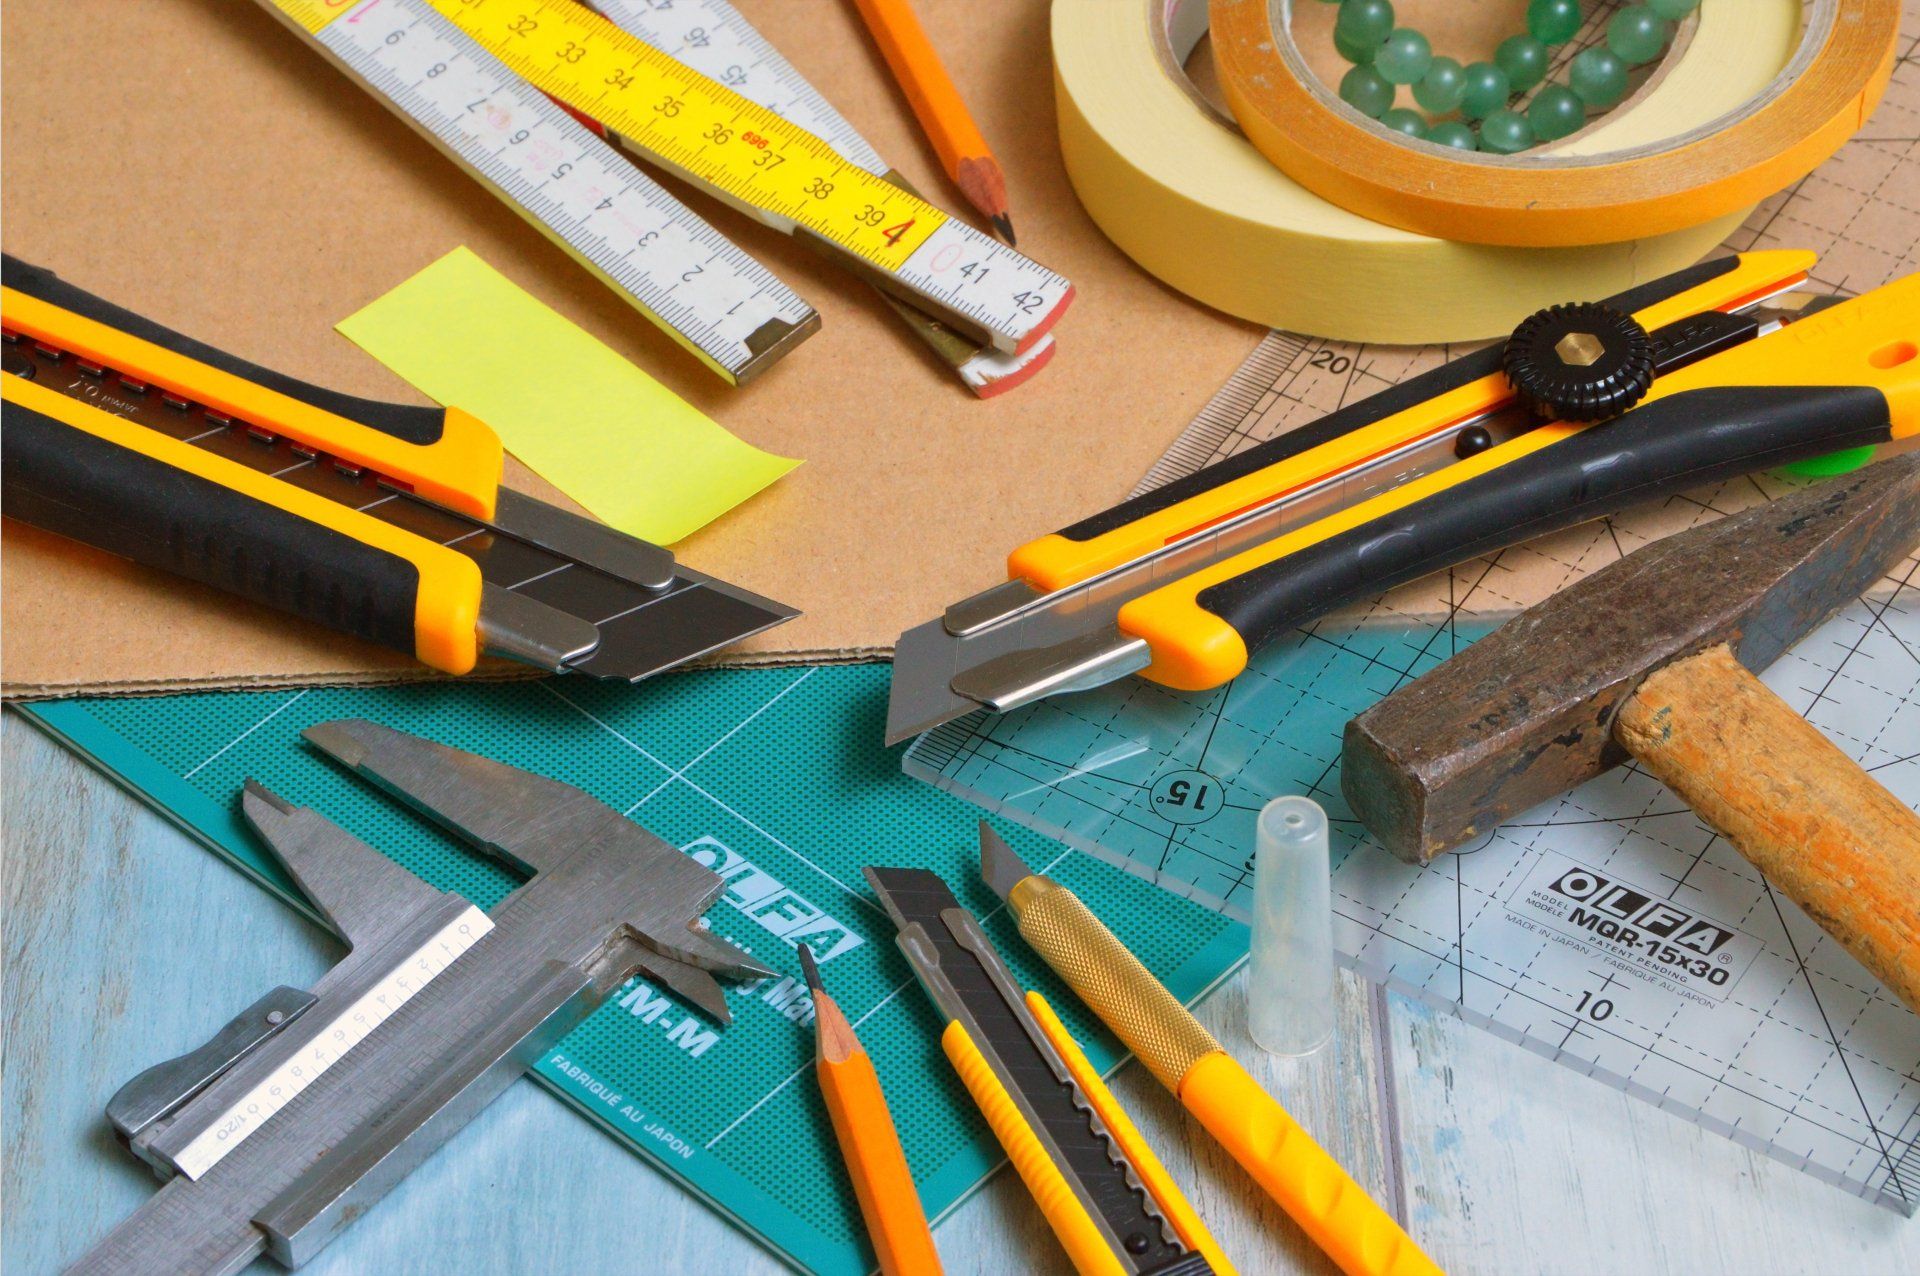 A variety of cutting and measuring tools on a table